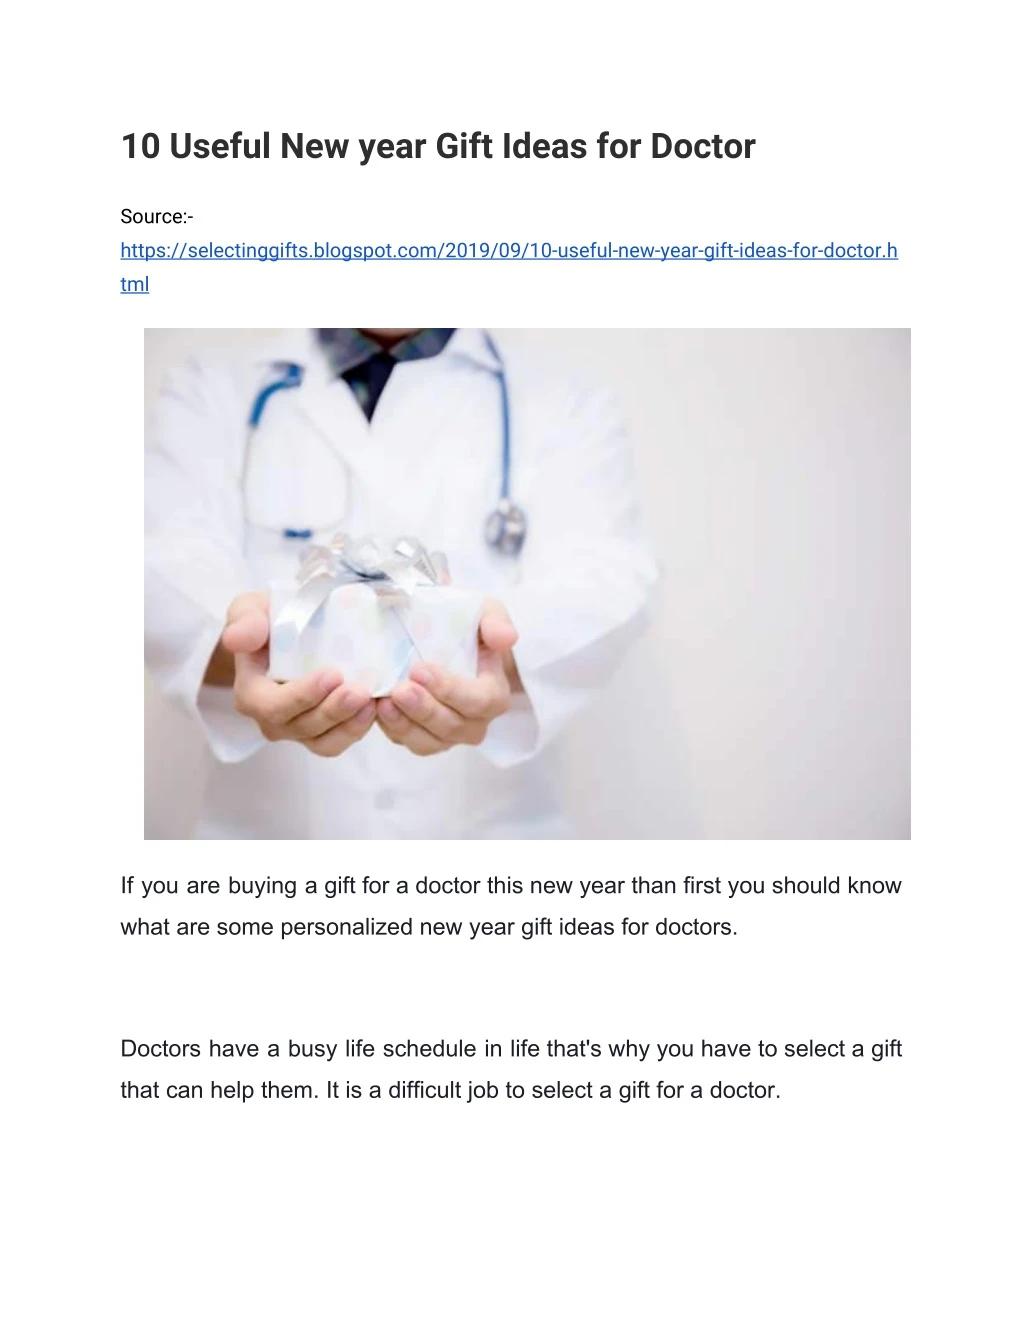 10 useful new year gift ideas for doctor